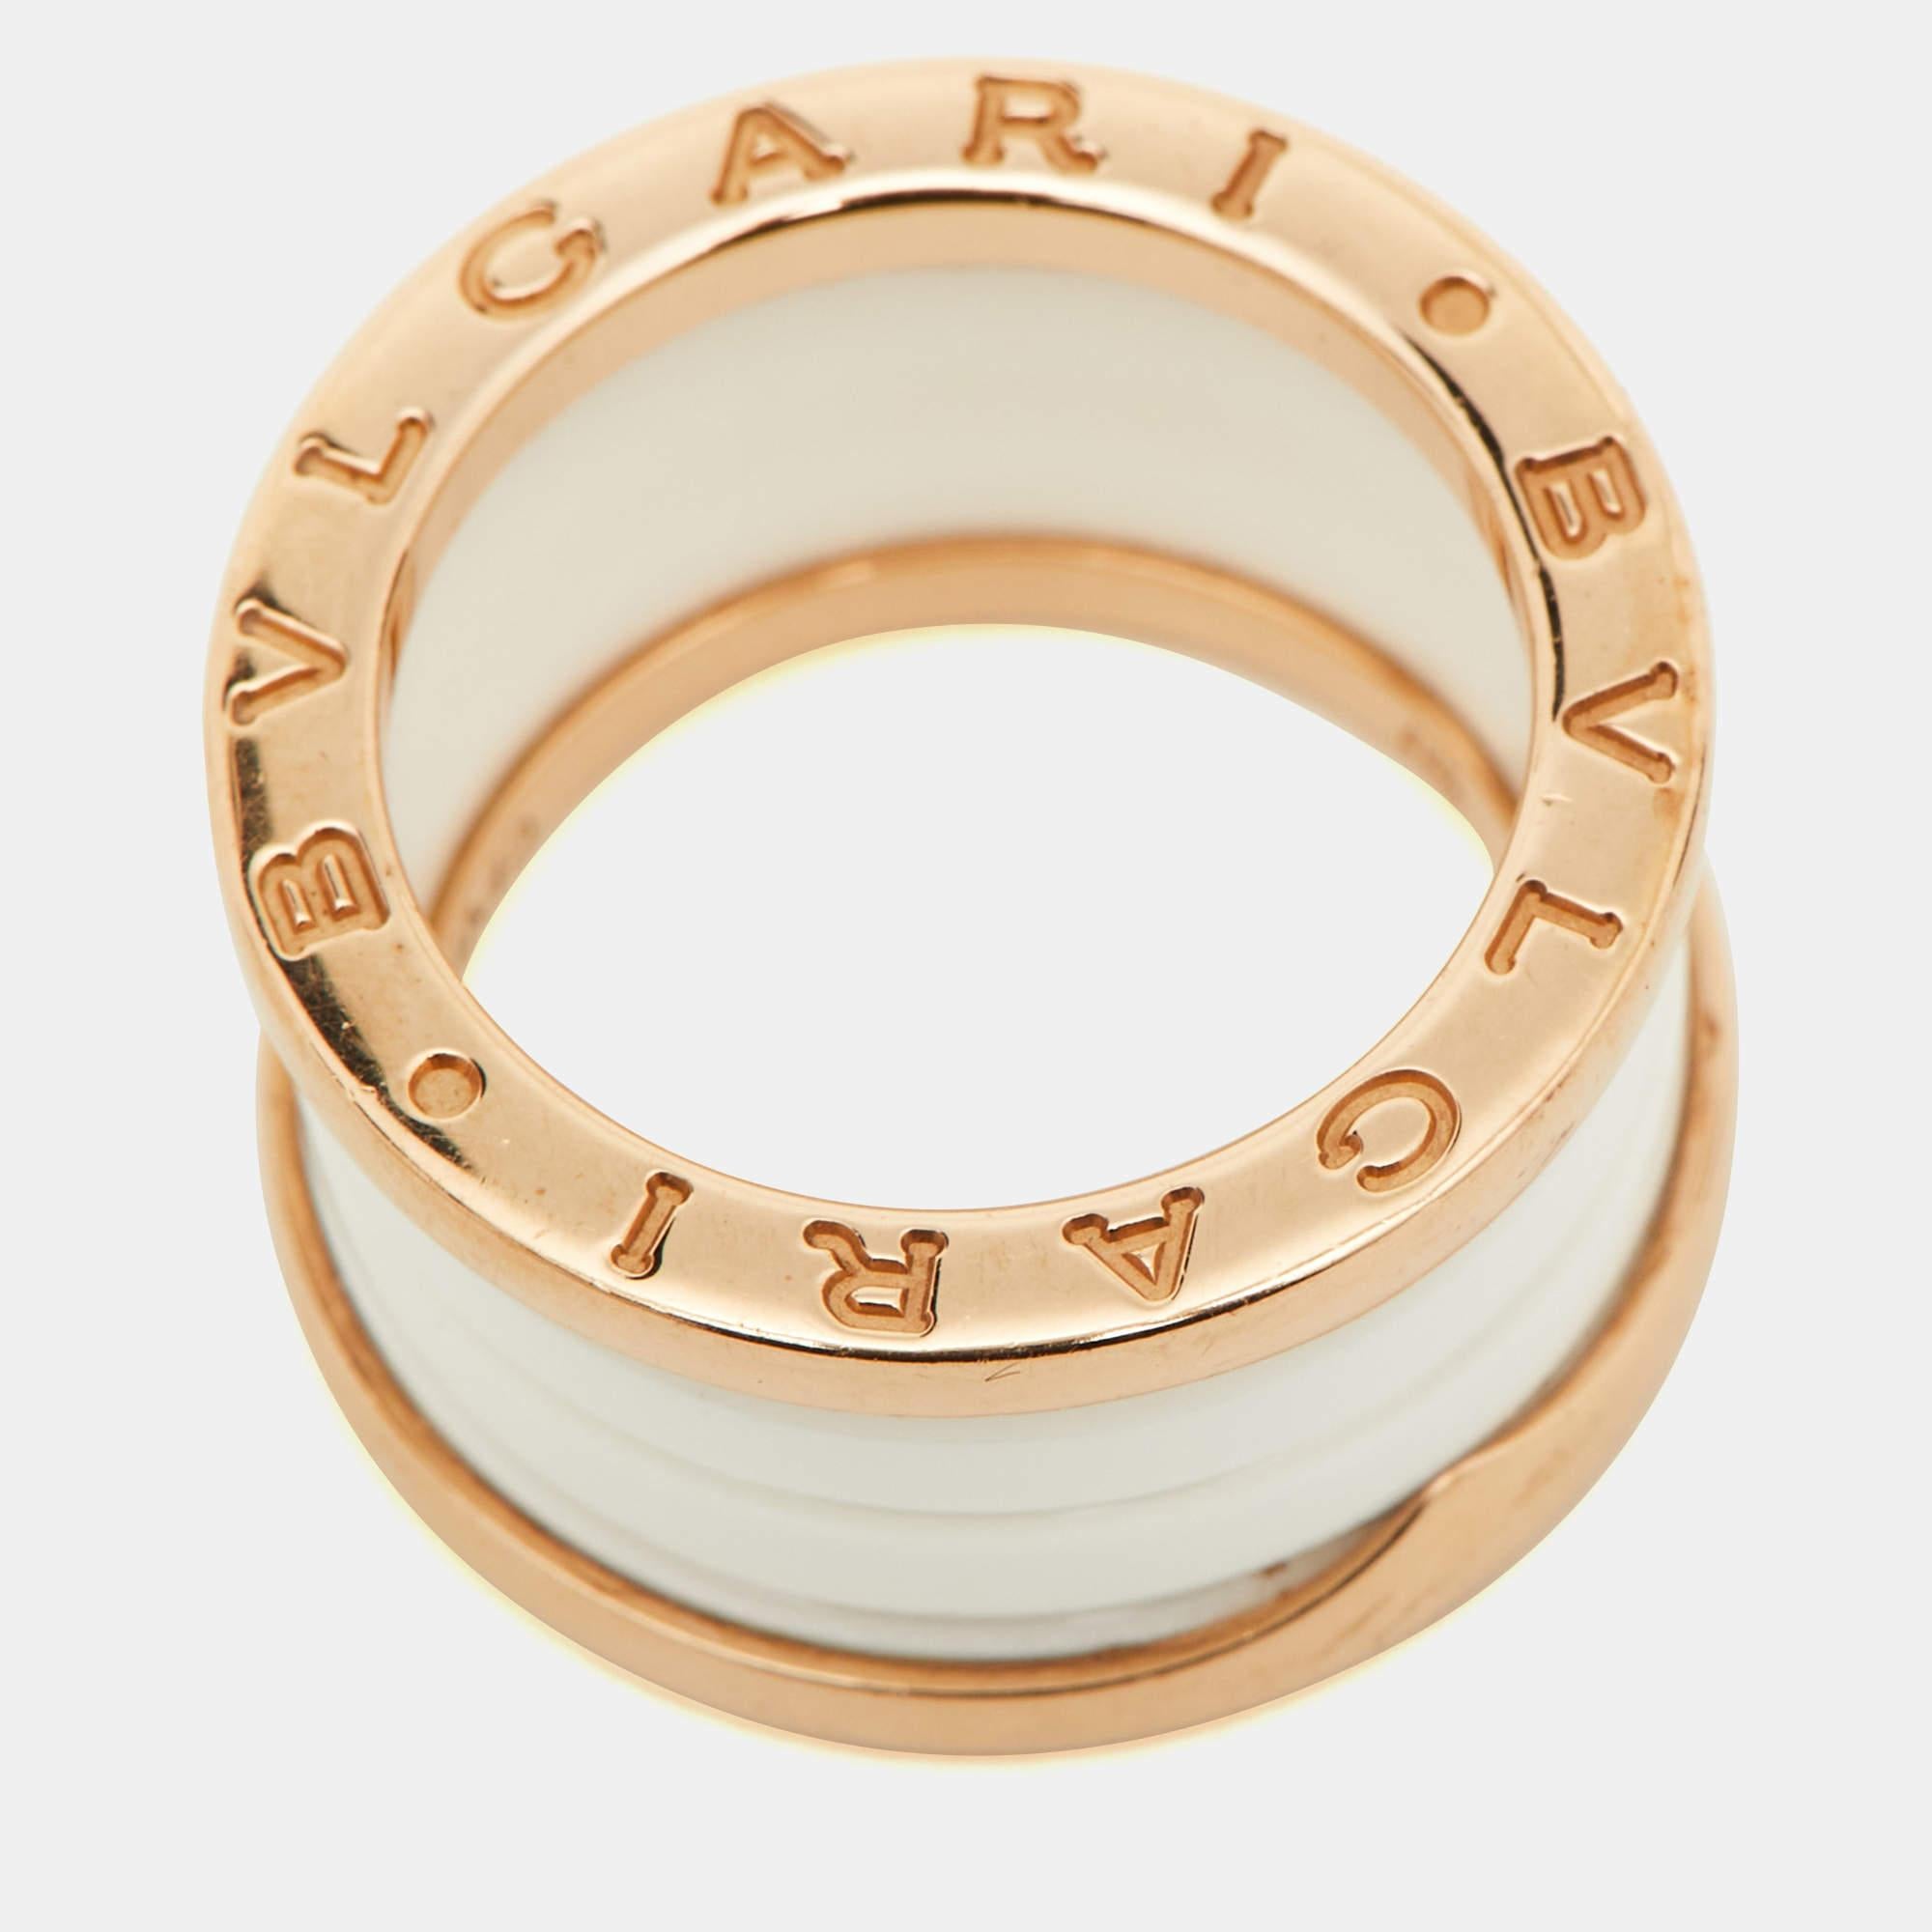 Unique and modern, this charming B.Zero1 band ring is from one of Bvlgari's iconic collections. Beautifully crafted from 18k rose gold and white ceramic, the ring has a stack of bands. Inspired by the Colosseum, this ring merges exceptional creative